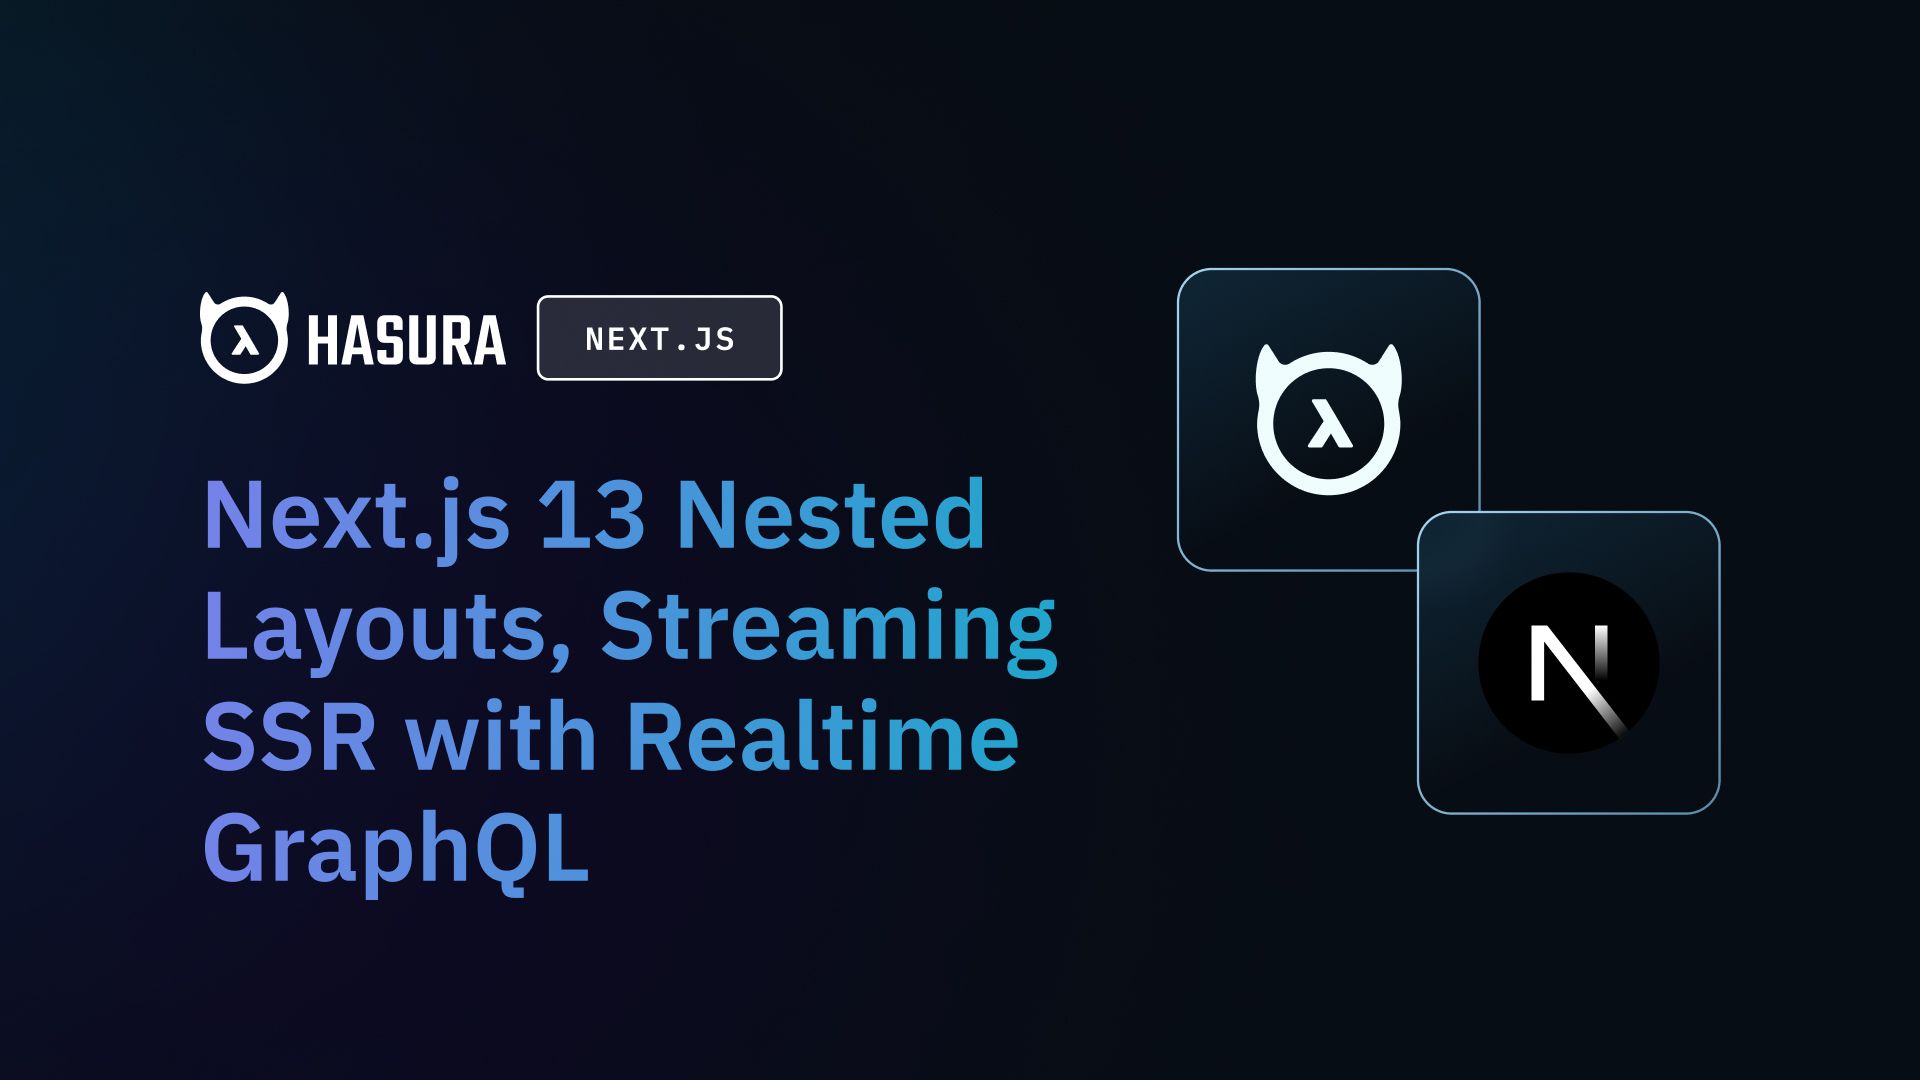 Next.js 13 Nested Layouts, Streaming SSR with Realtime GraphQL